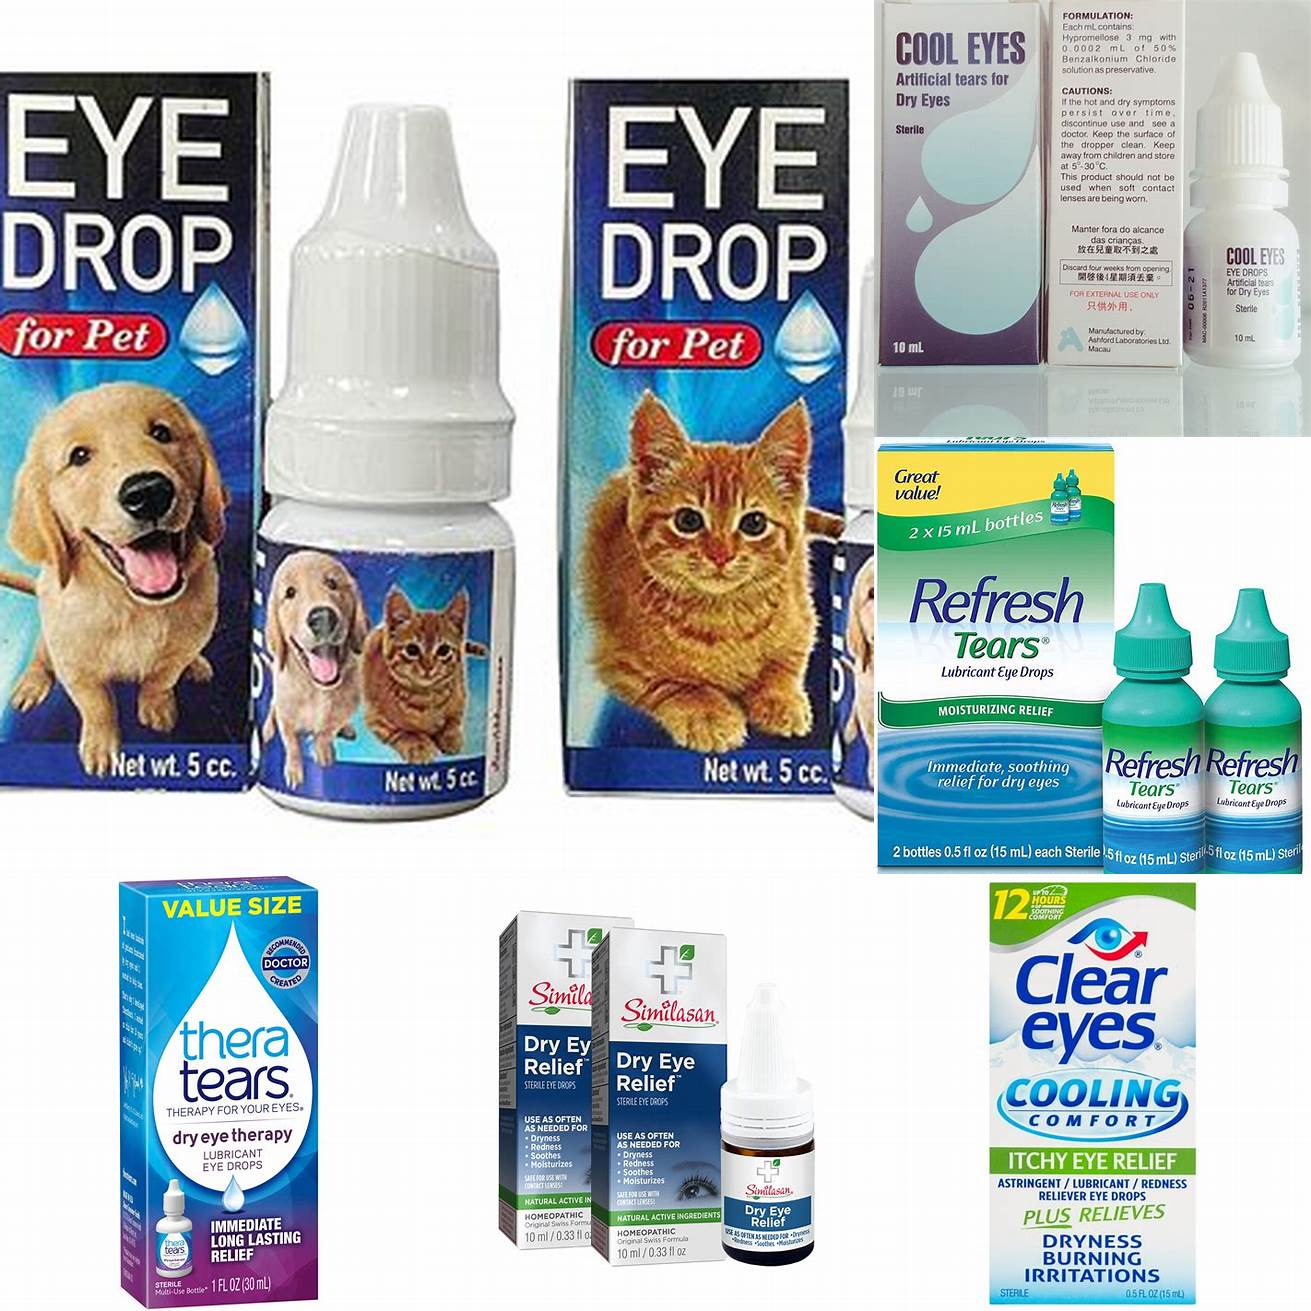 2 Keep your eye drops in a cool dry place